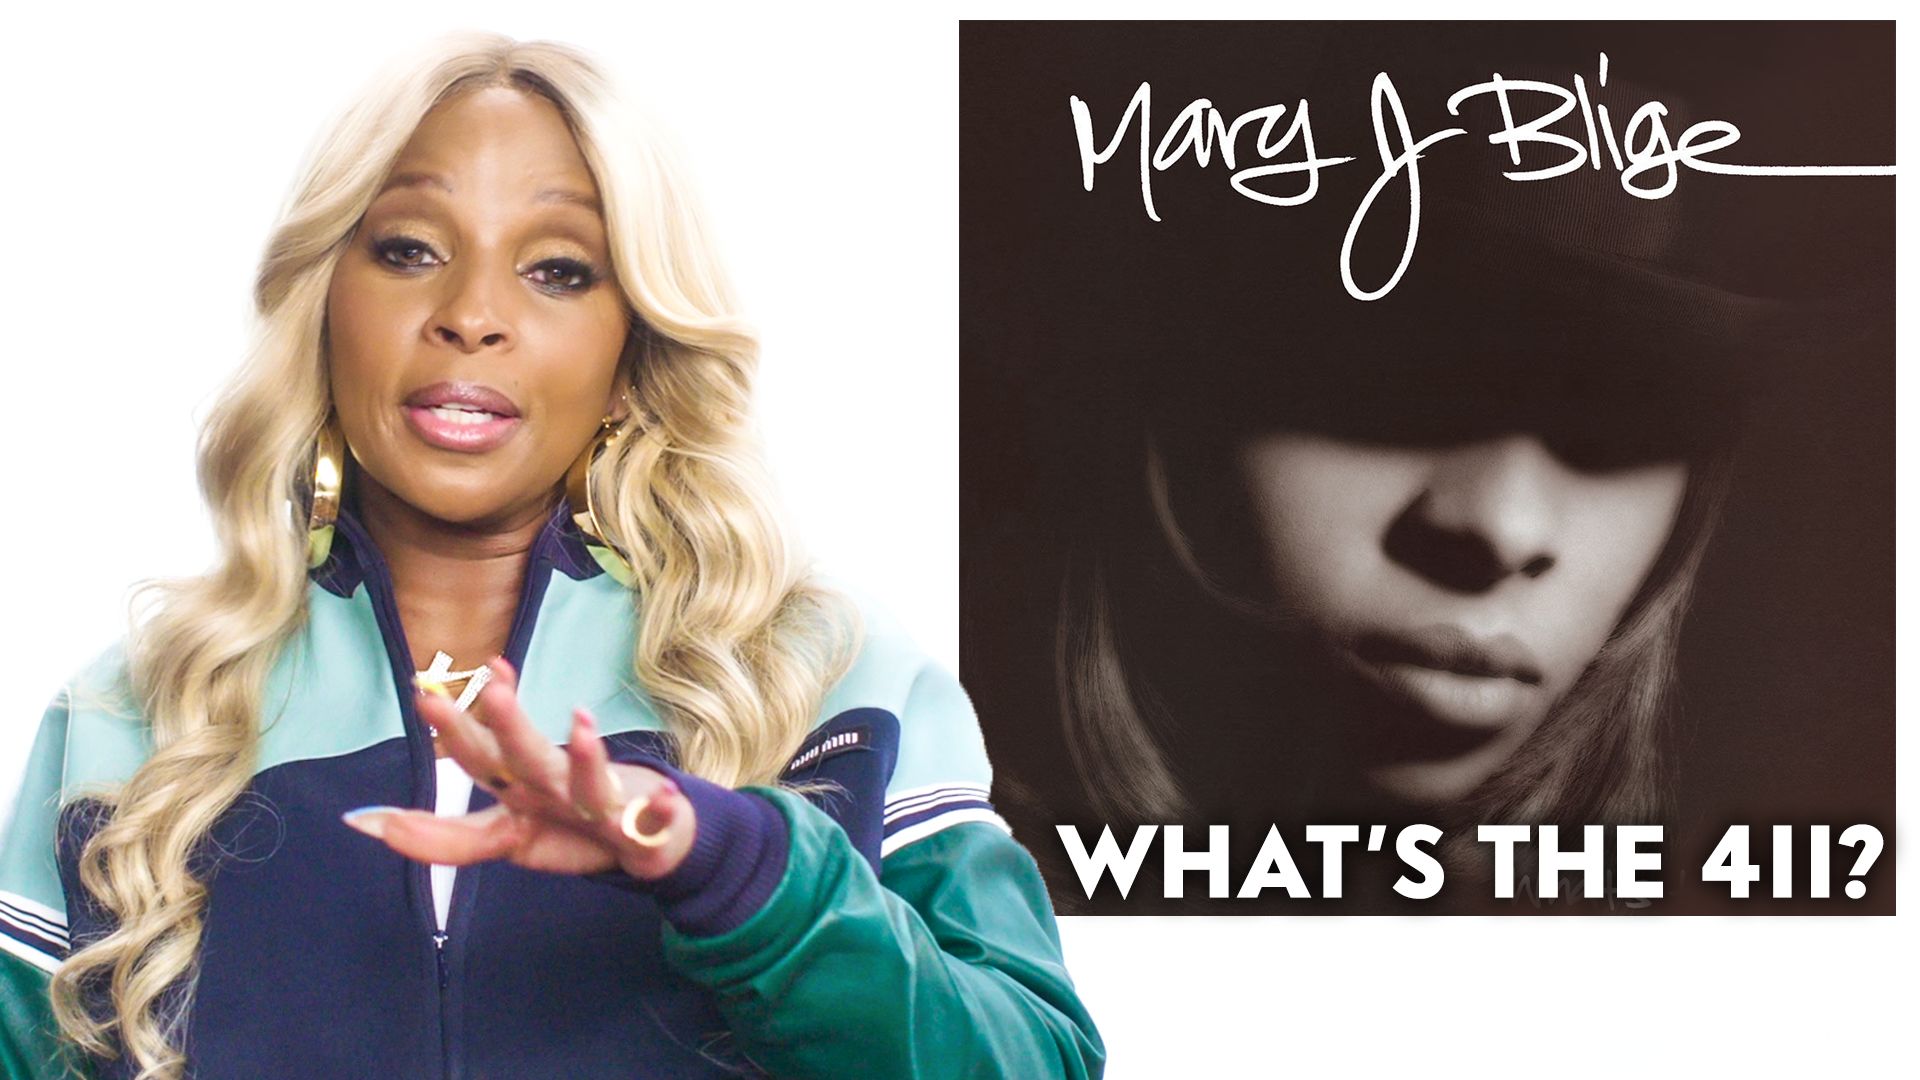 What Is Mary J. Blige's Real Name?